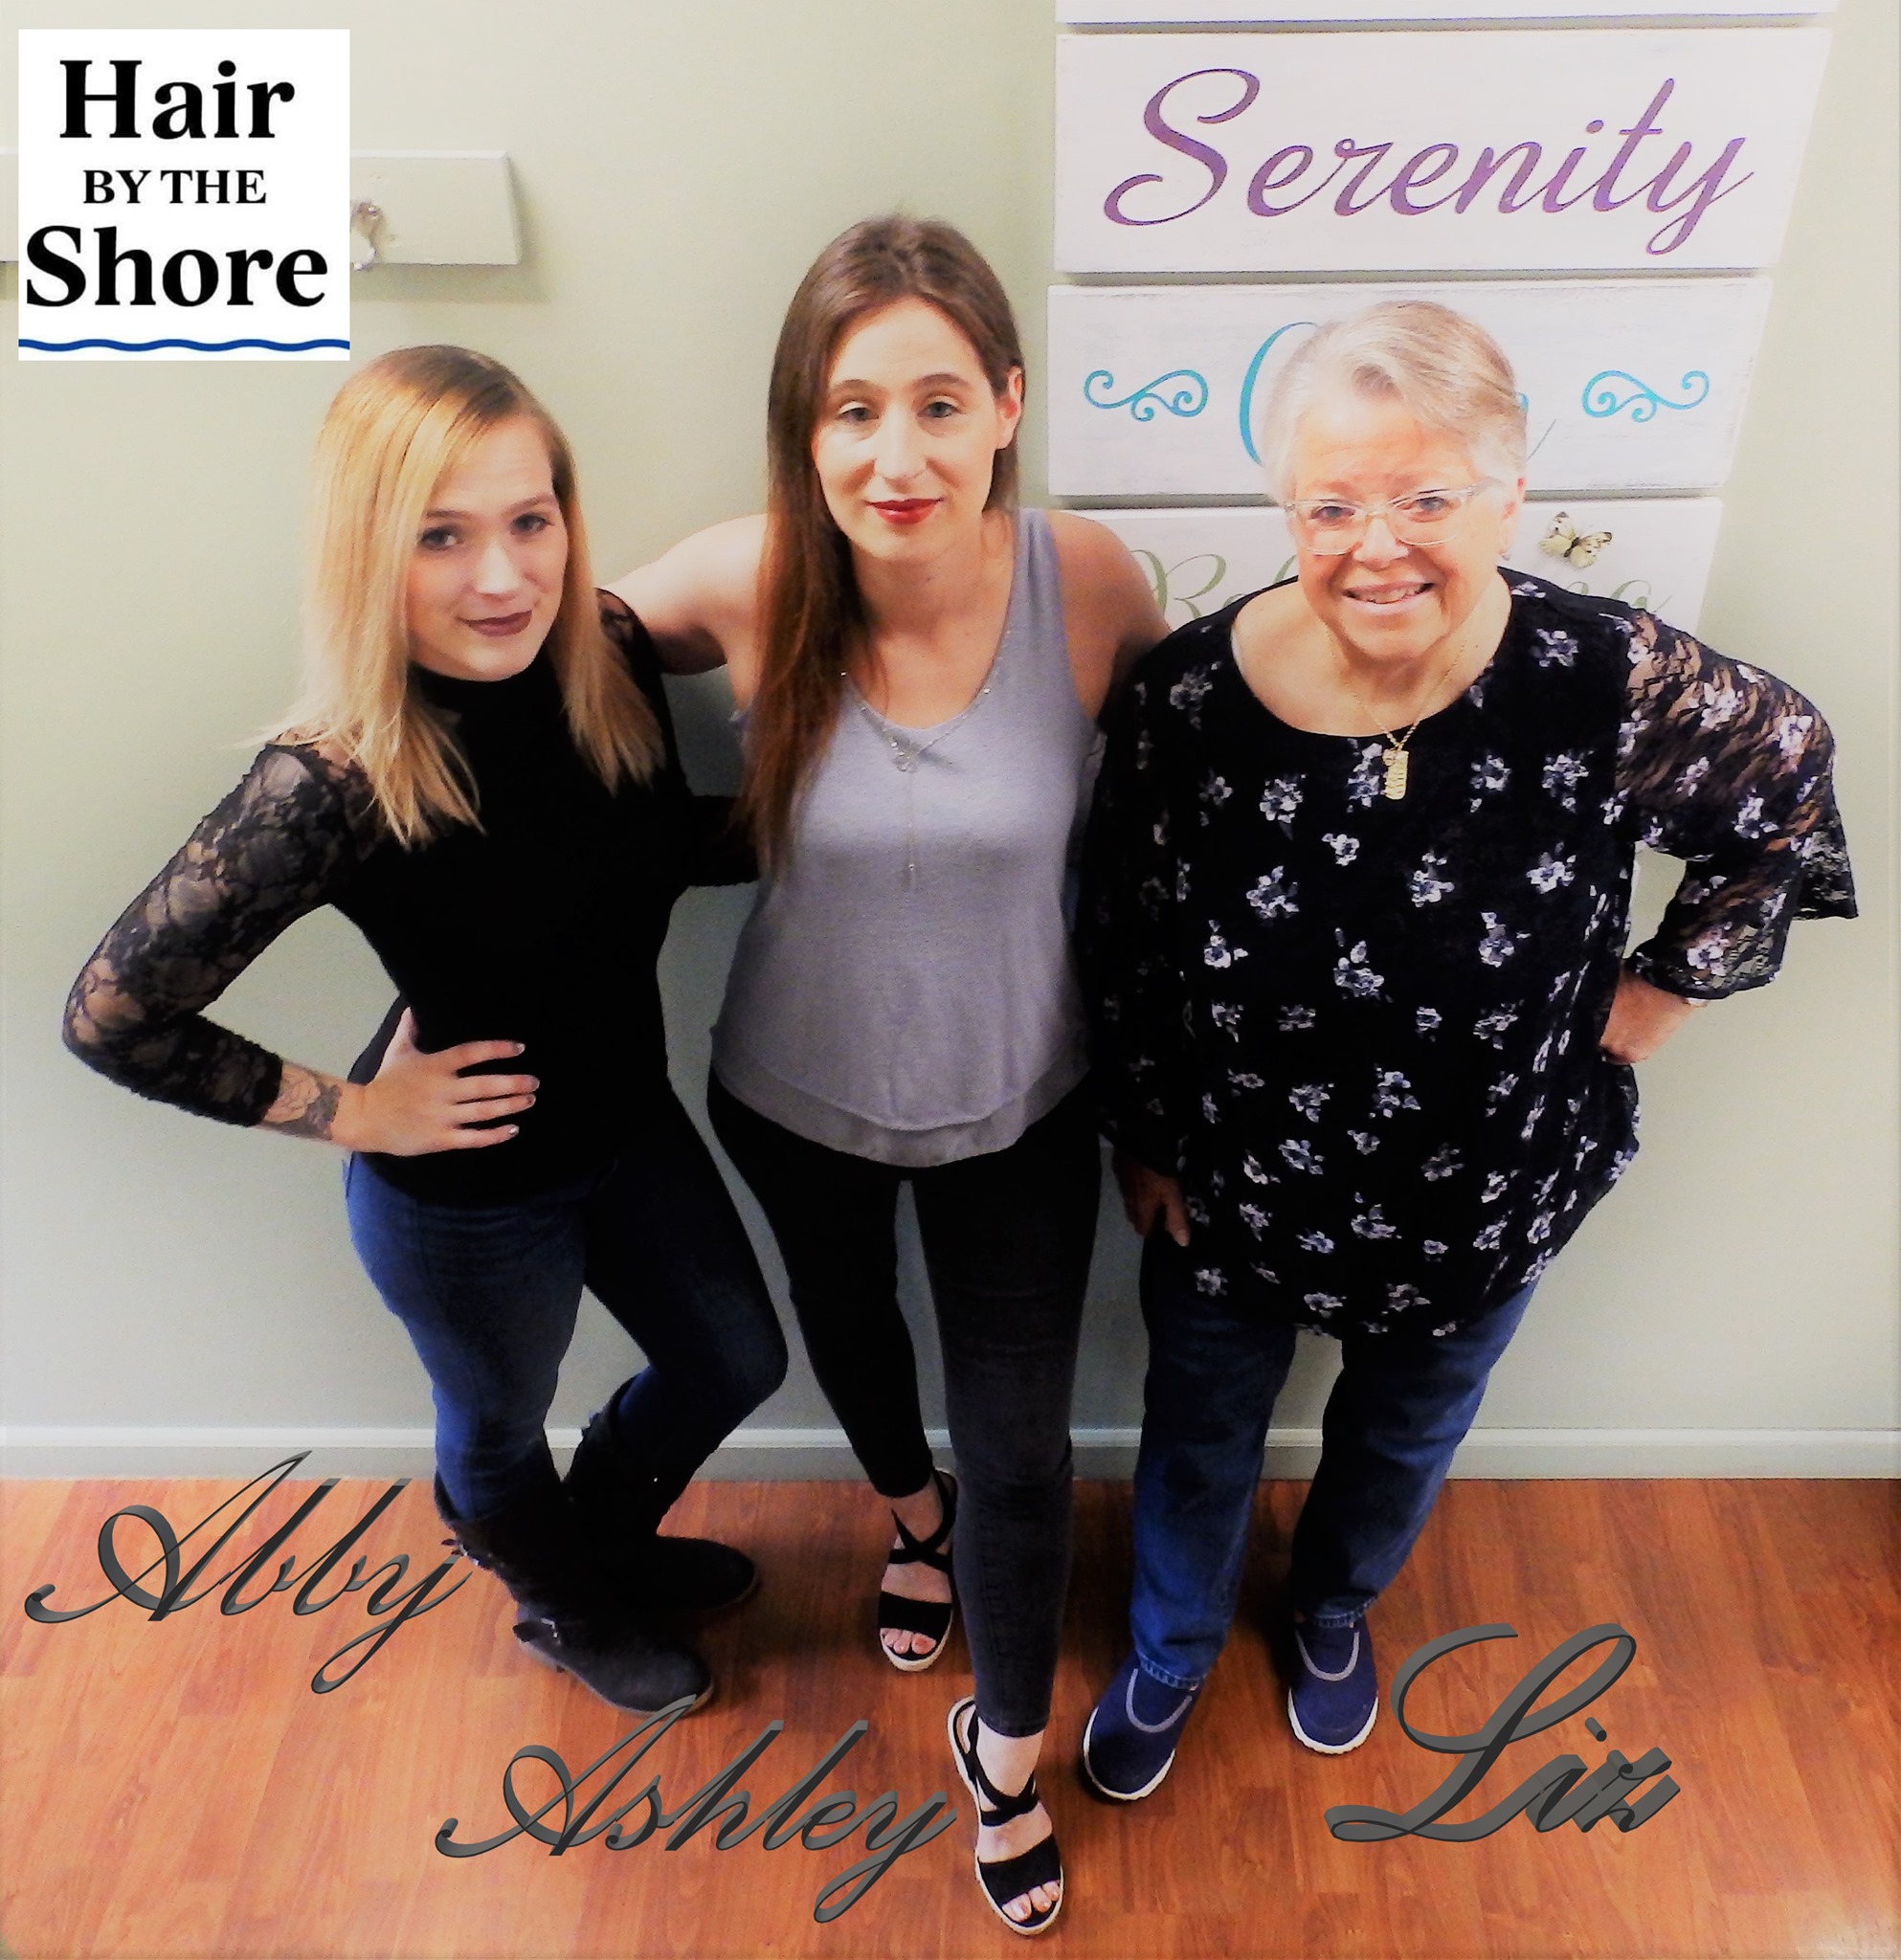 Hair By The Shore 5703 Red Arrow Hwy, Stevensville Michigan 49127